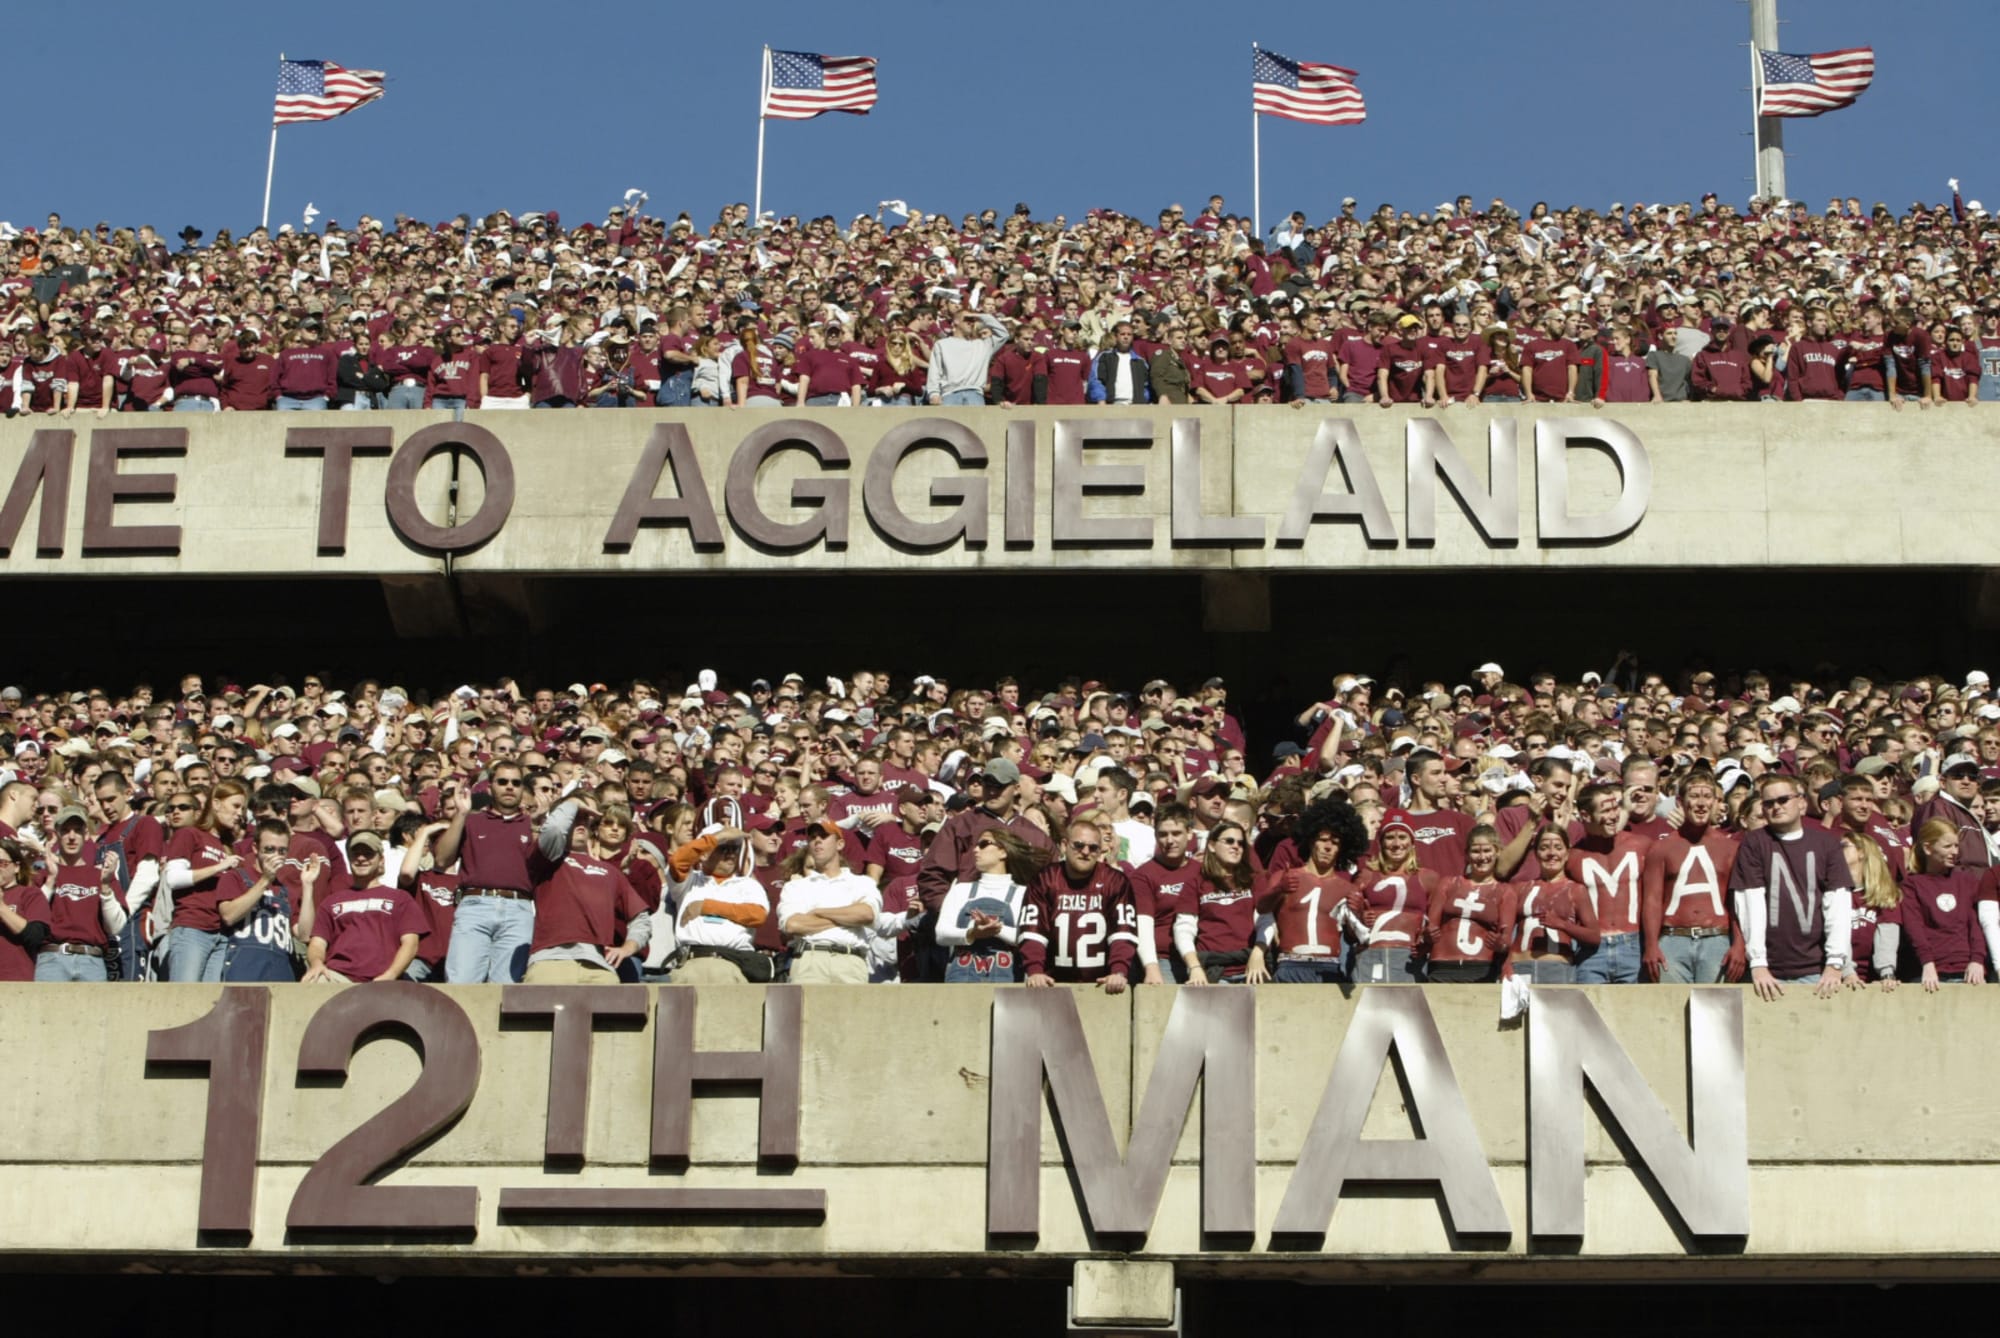 Texas A&M has hated rival Texas to thank for some traditions - ESPN